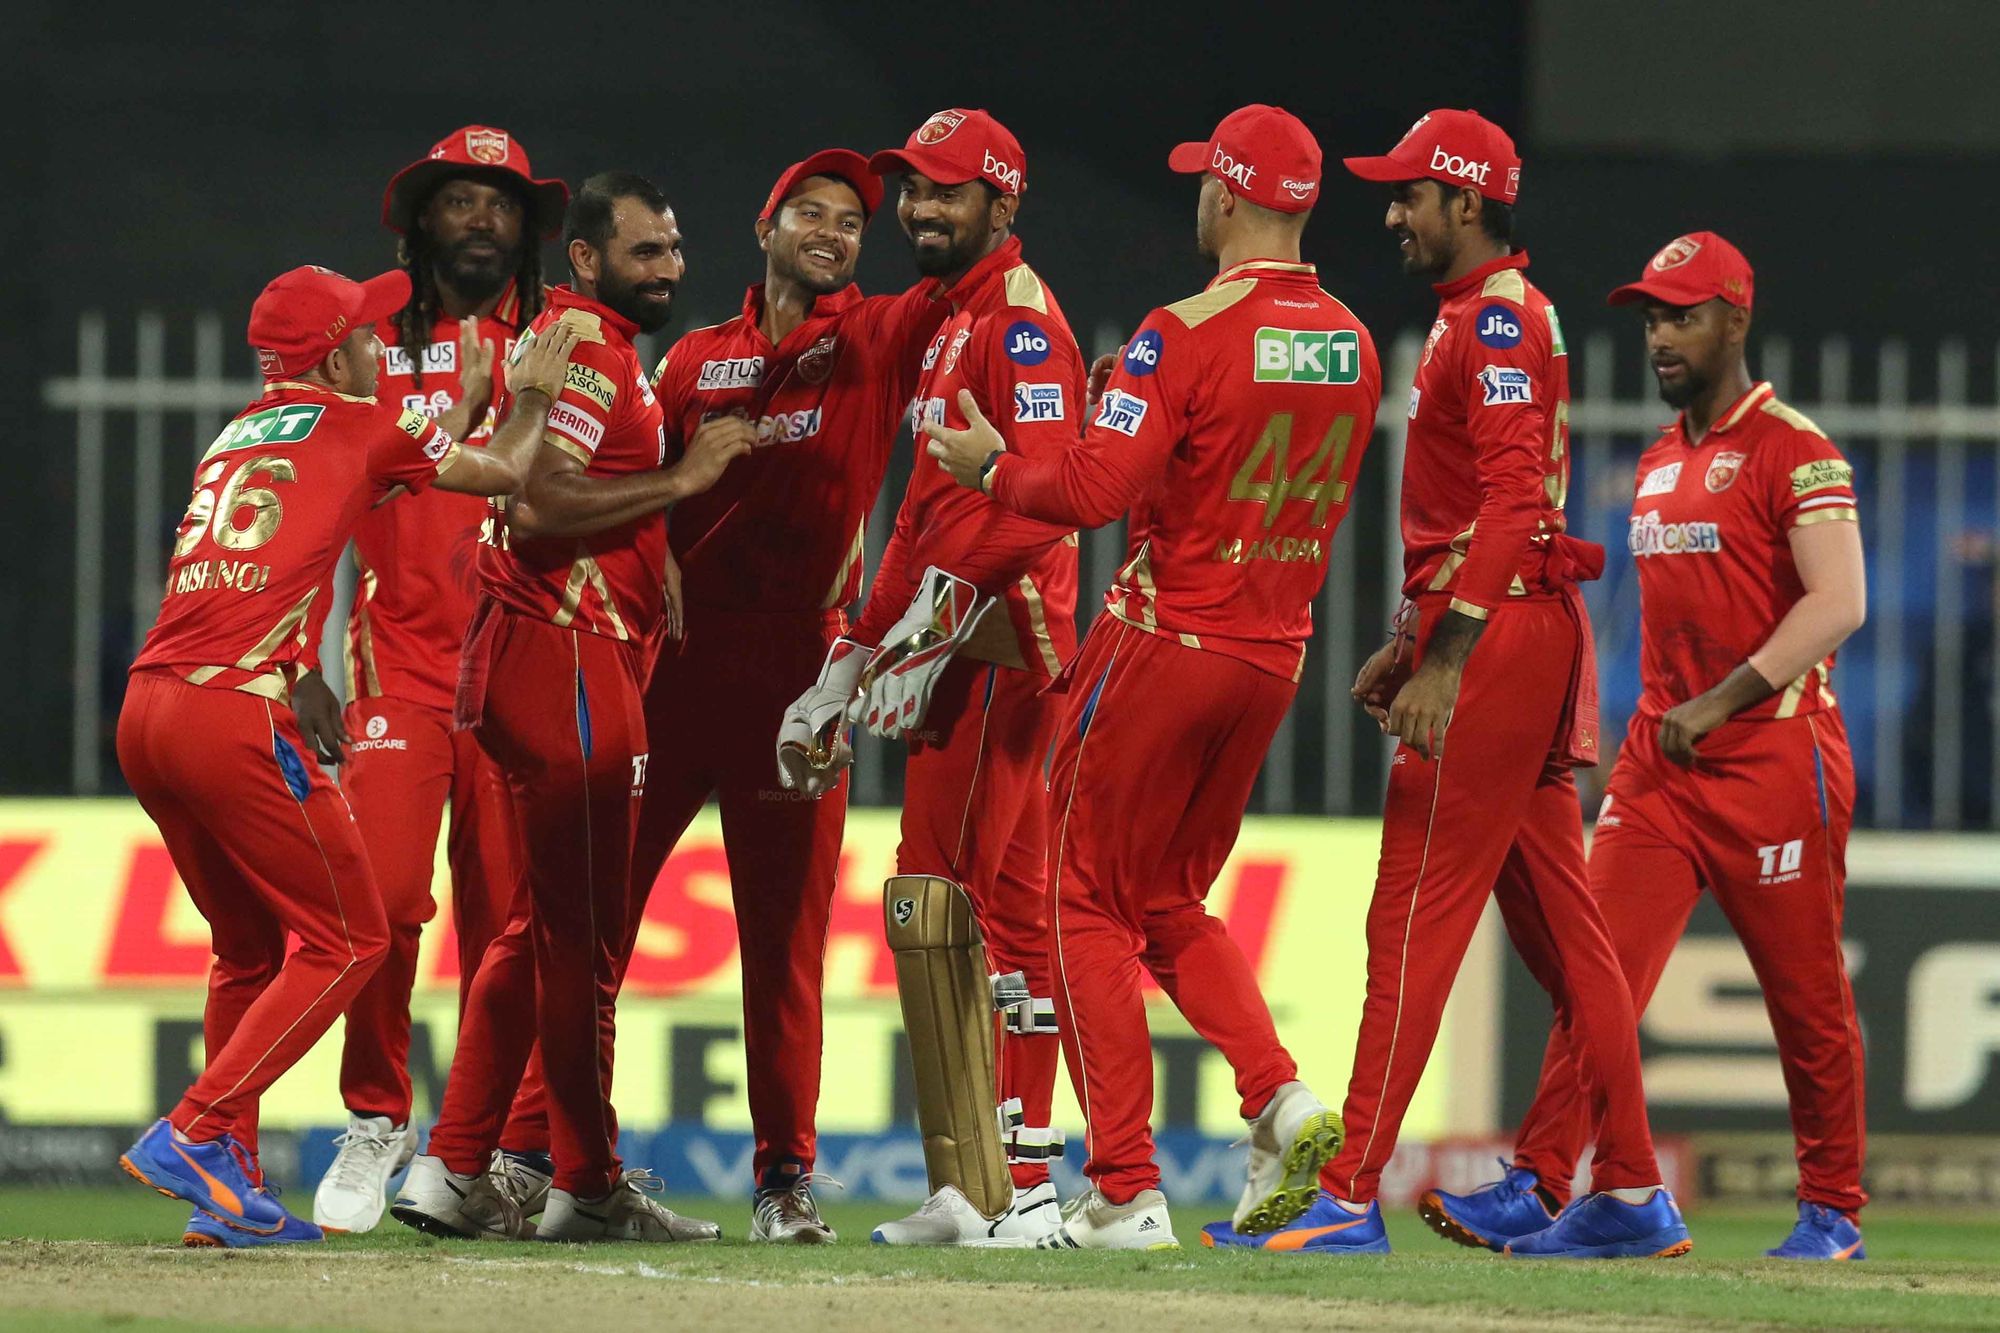 PBKS came back strongly after a disappointing loss against RR | BCCI/IPL